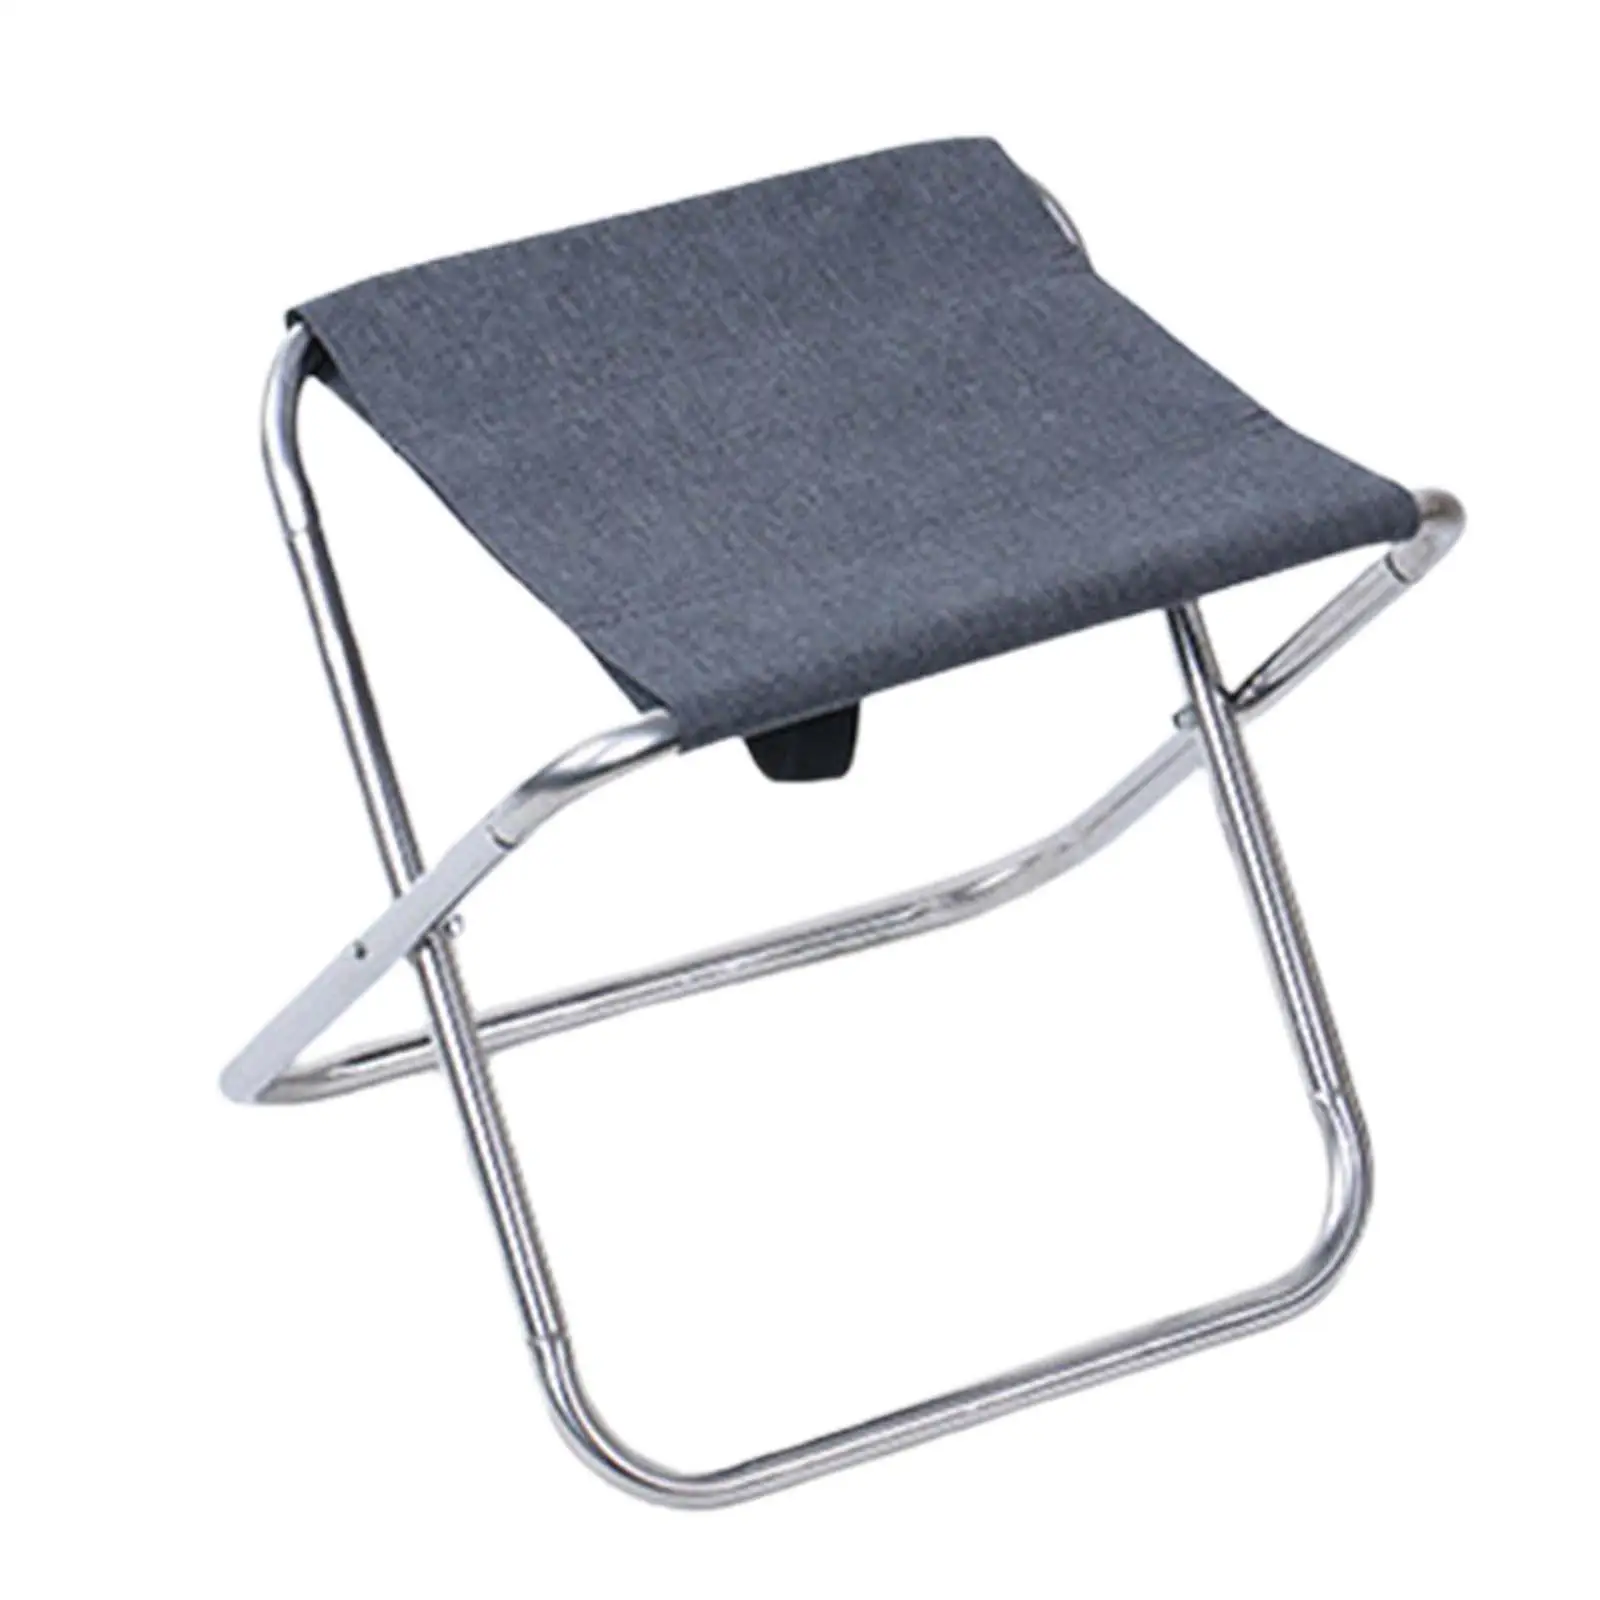 Folding Stool Camping Mini Collapsible Camping Chair Lightweight Camp Stool Portable for Park Barbecue Festival Sports Gardening